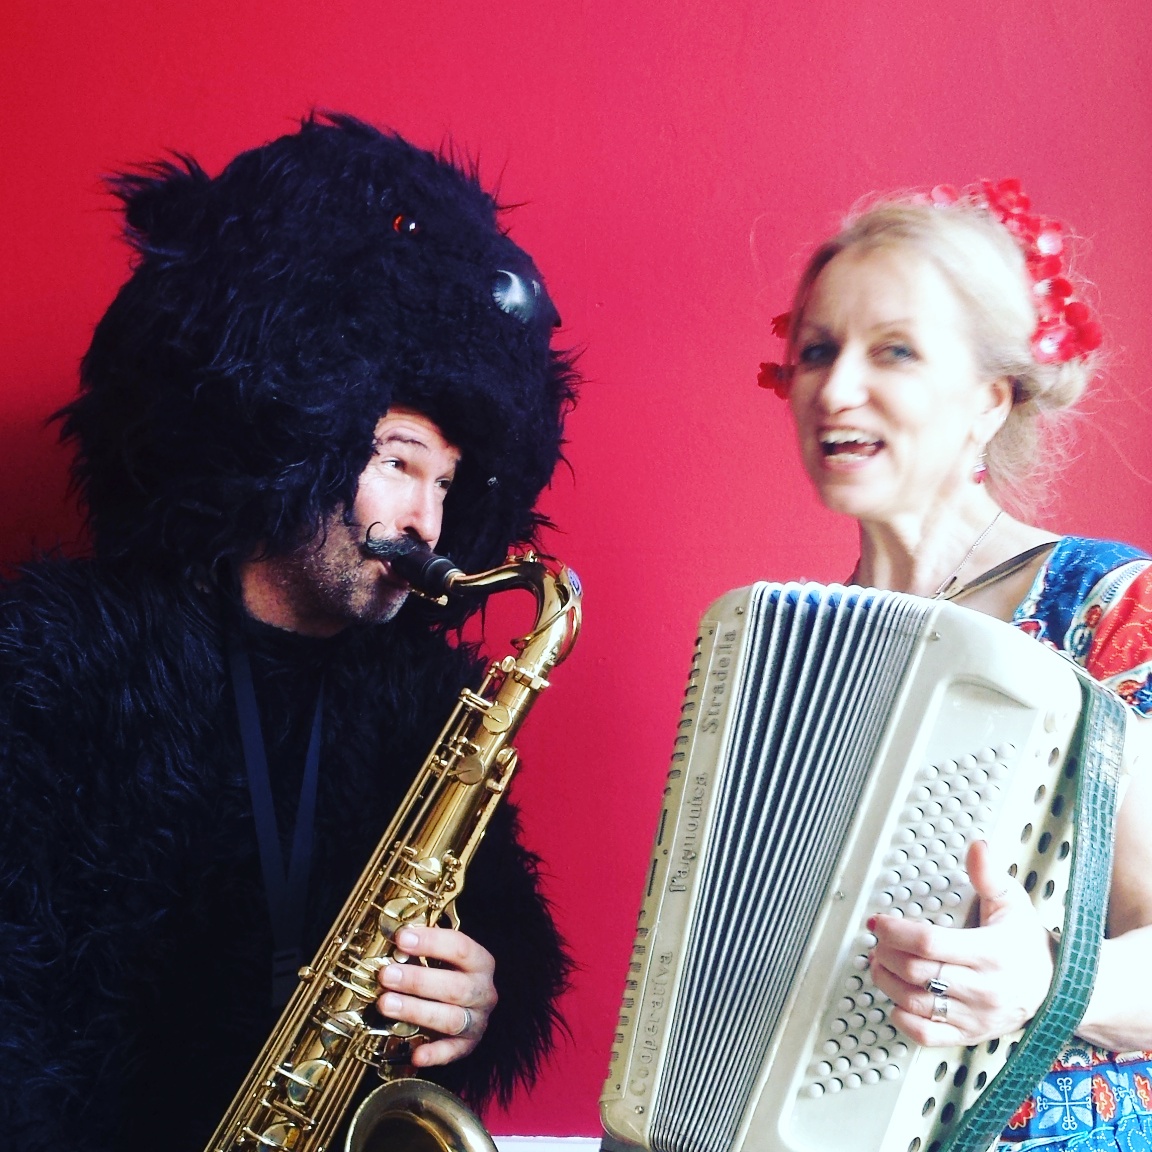 man dressed as bear playing a saxophone with a woman playing accordion